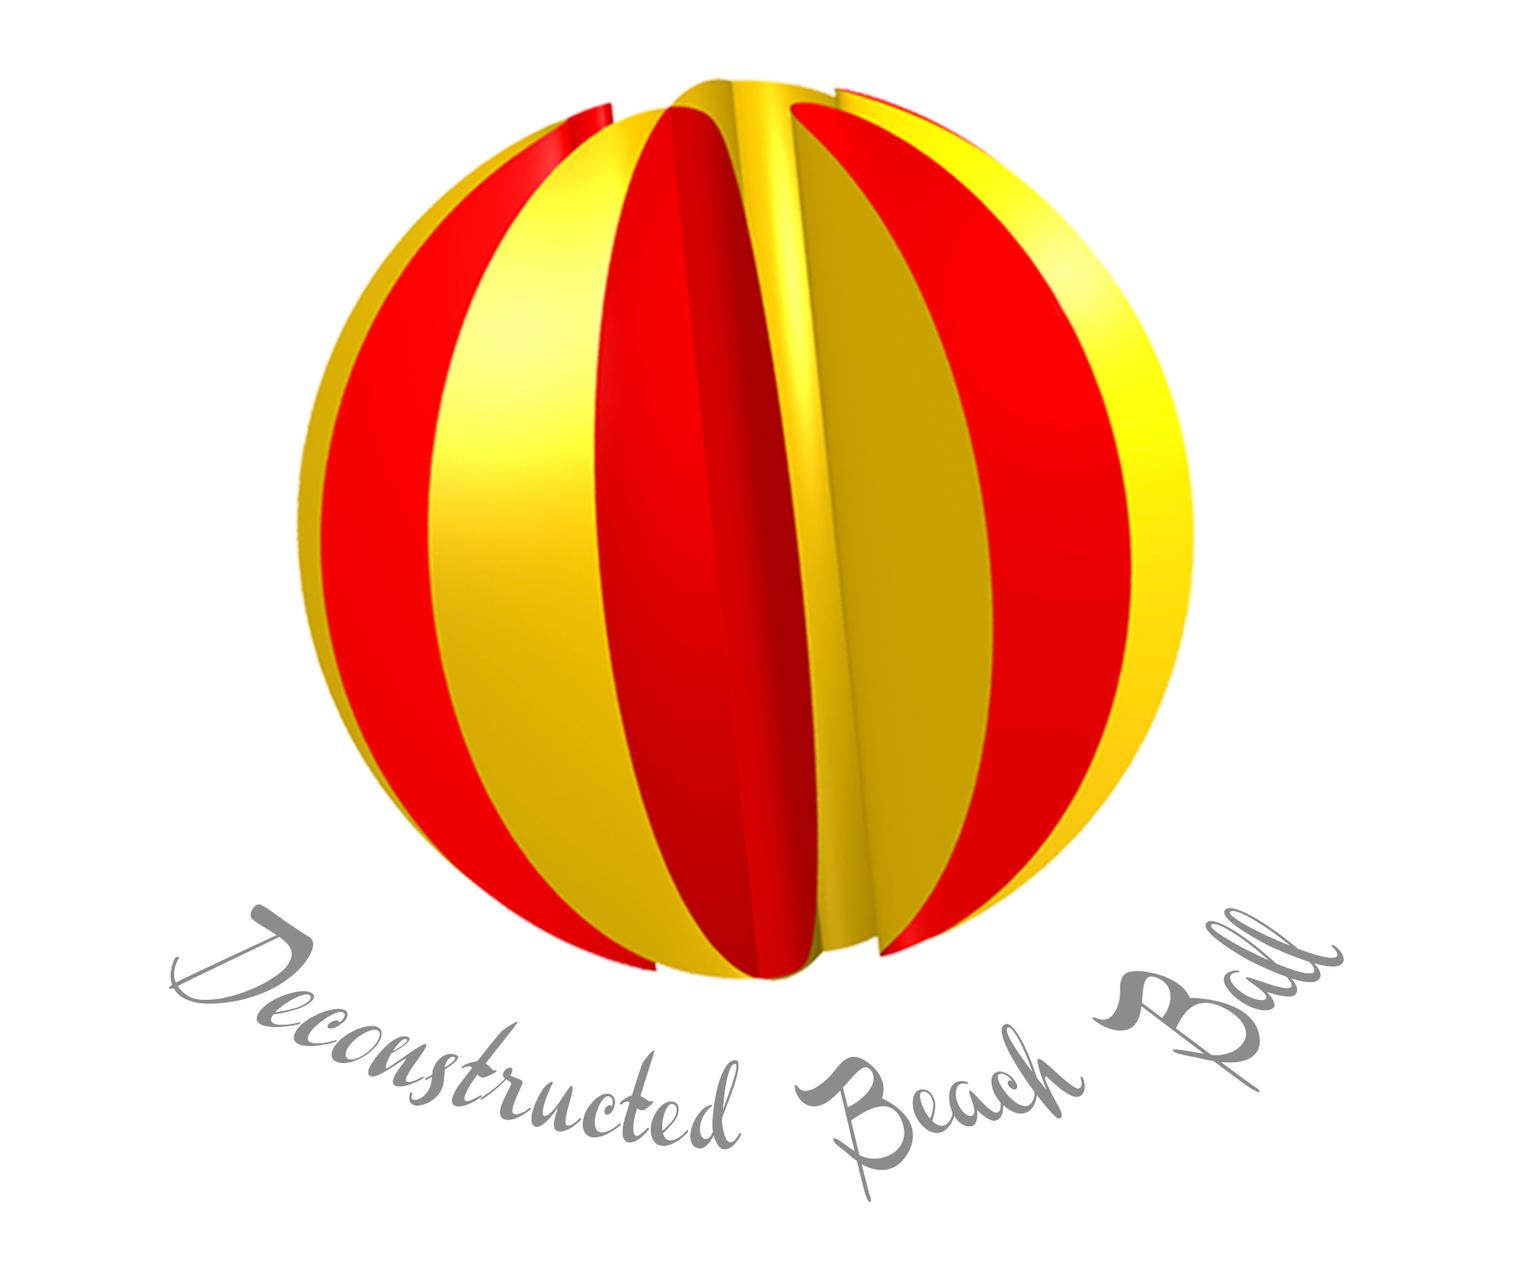 Image for entry 'Deconstructed Beach Ball'